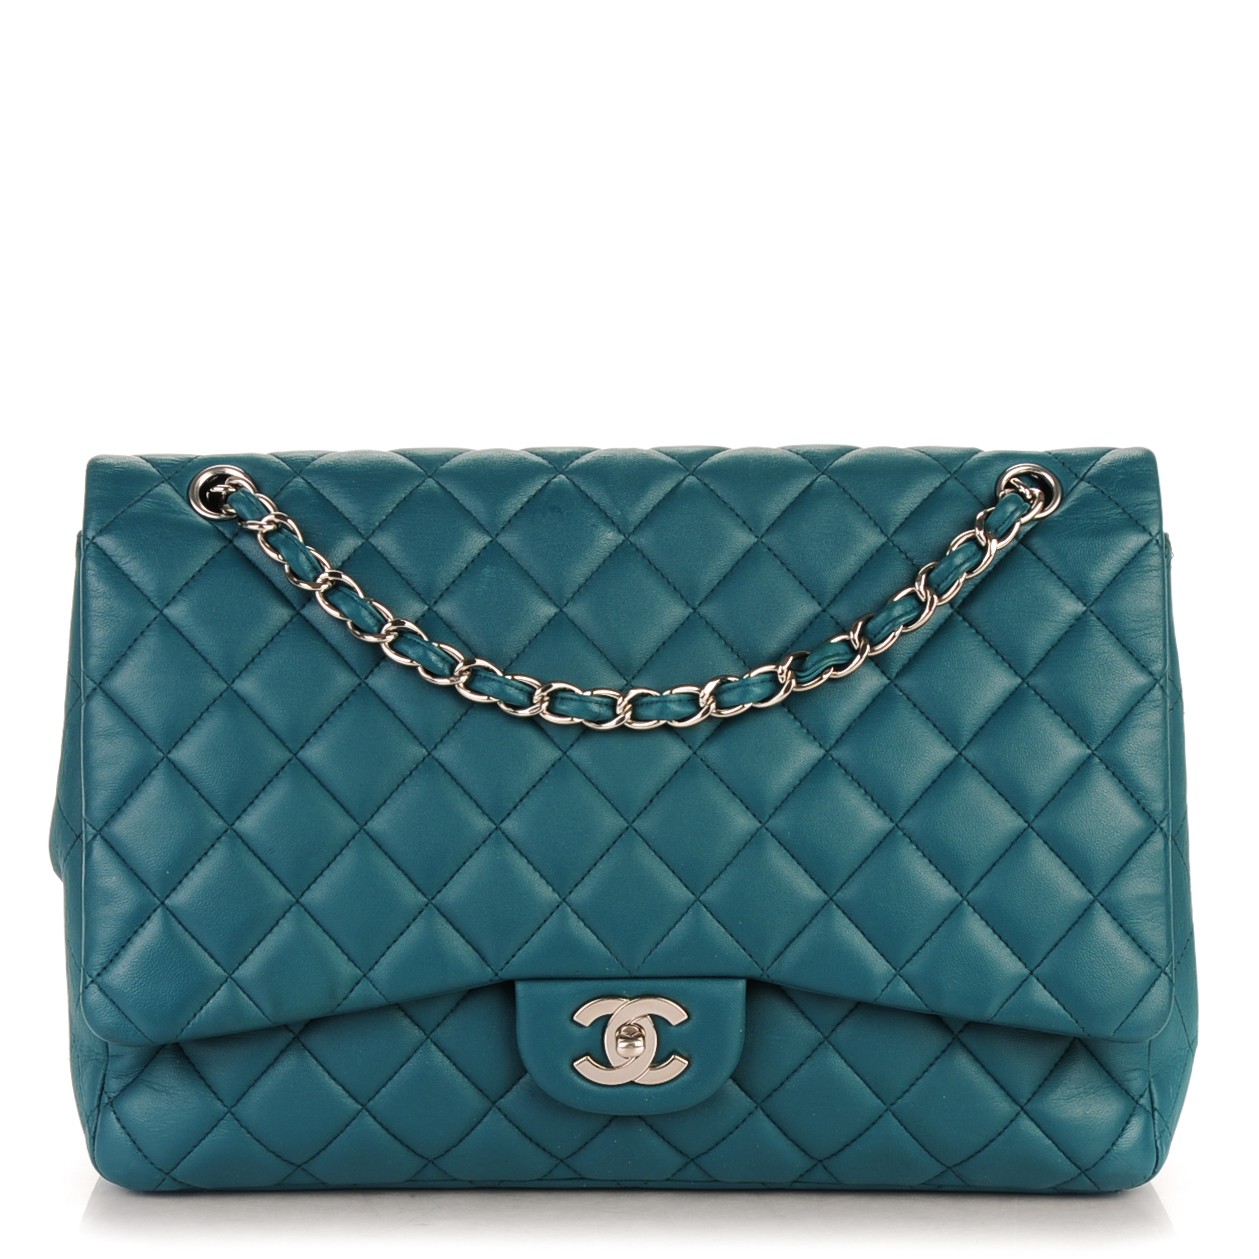 CHANEL Lambskin Quilted Maxi Single Flap Turquoise 154035 | FASHIONPHILE